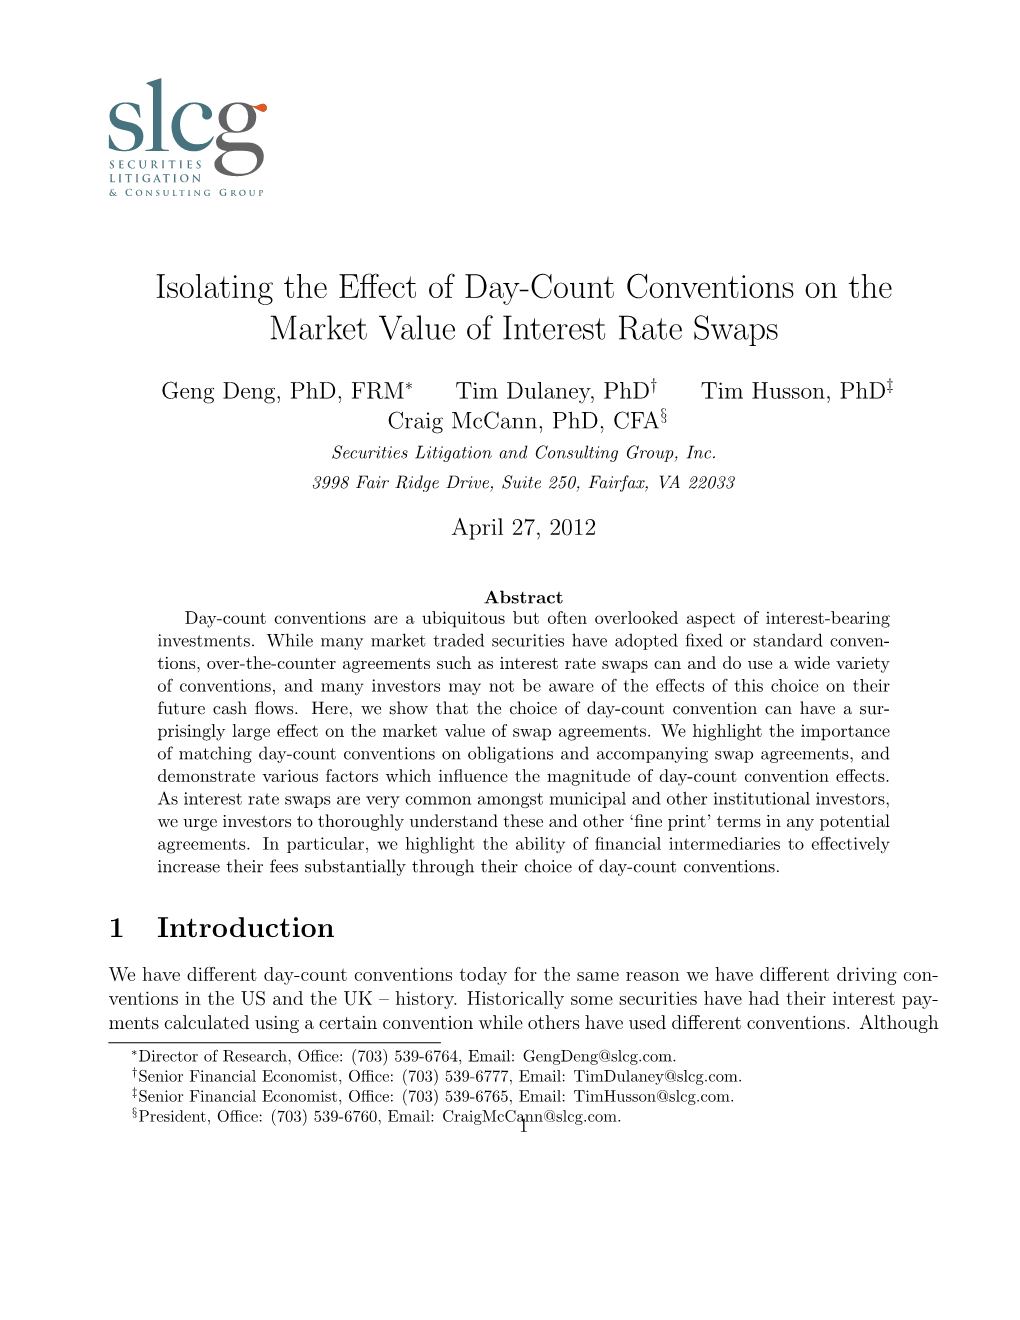 Isolating the Effect of Day-Count Conventions on the Market Value Of